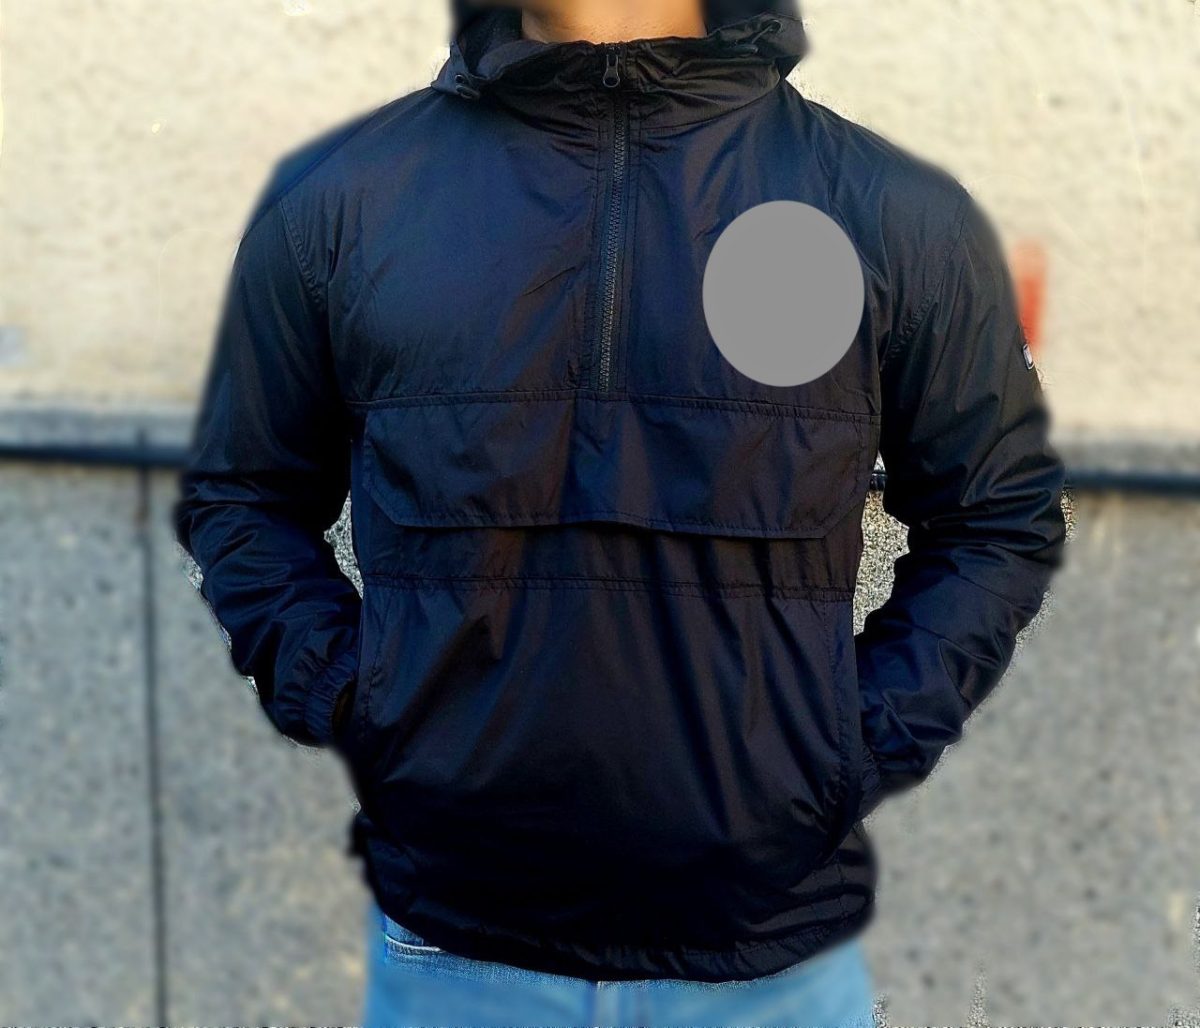 Three photos posted on Rob Rundo’s fashion brand website on October 31, 2022. Bellingcat has obscured the logo and text on the jacket here, and in all instances below, to avoid promoting this far-right brand.